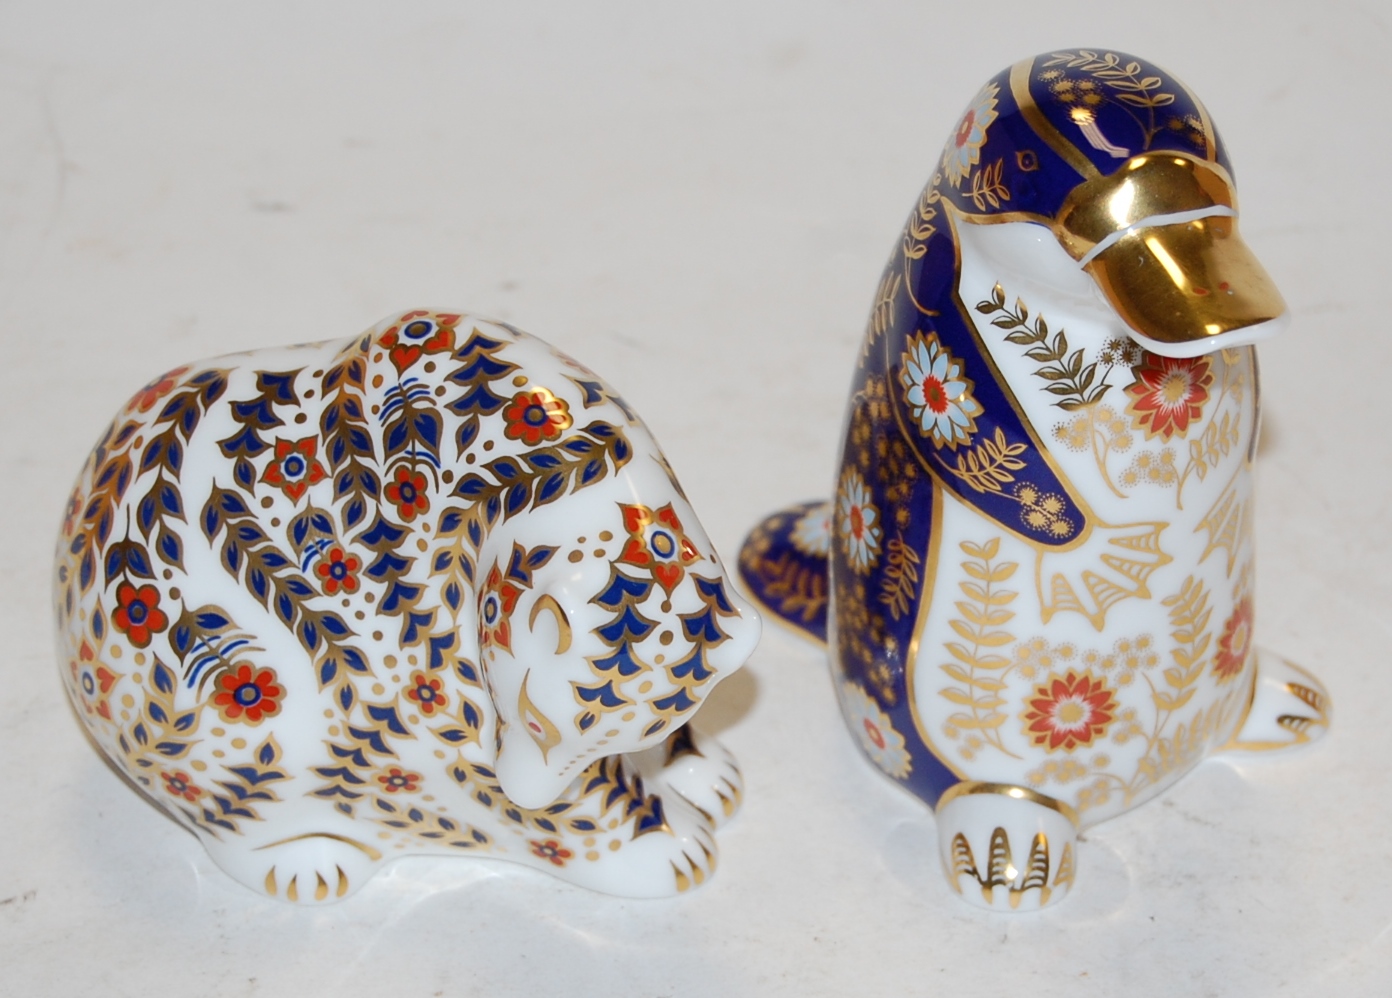 A Royal Crown Derby desk ornament in the form of a duck-billed platypus,